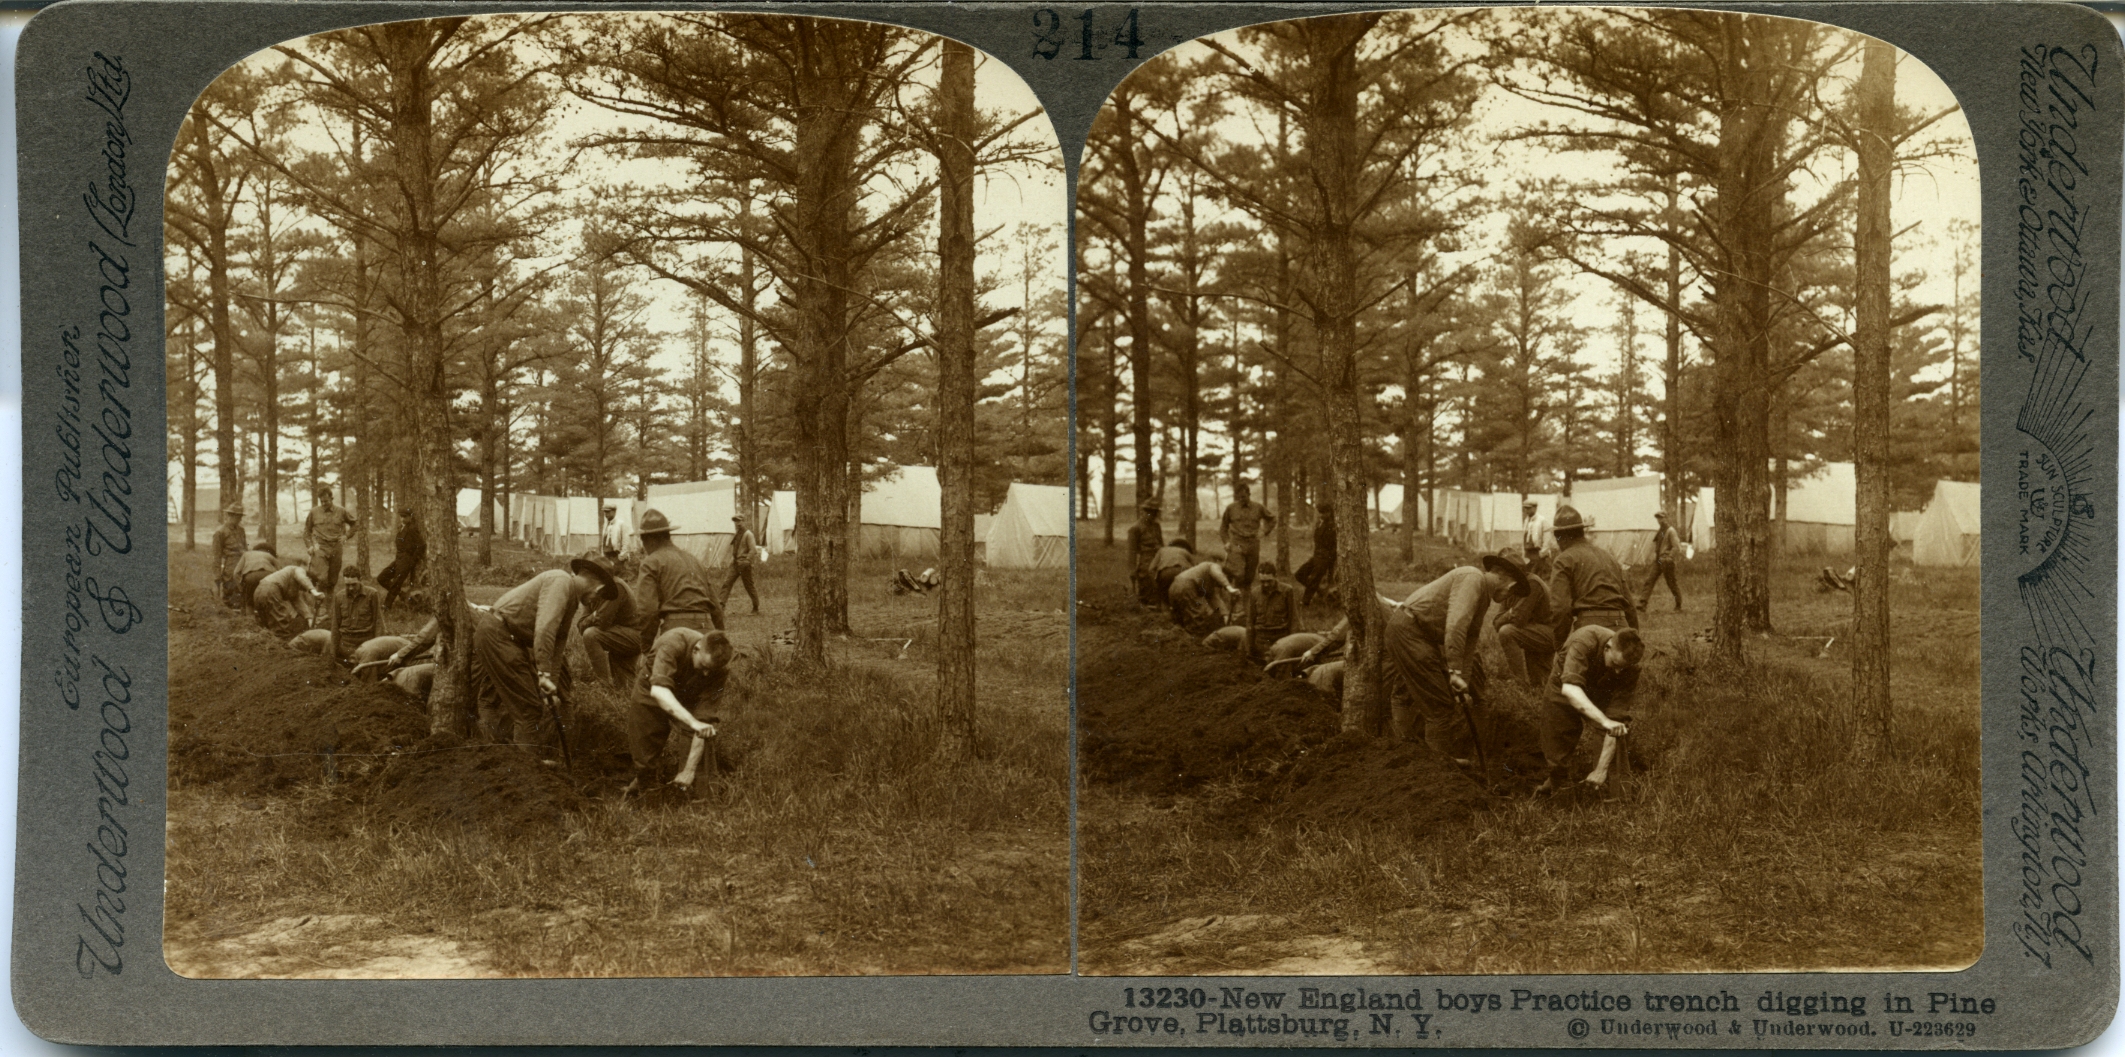 New England boys Practice trench digging in Pine Grove, Plattsburg, N.Y.